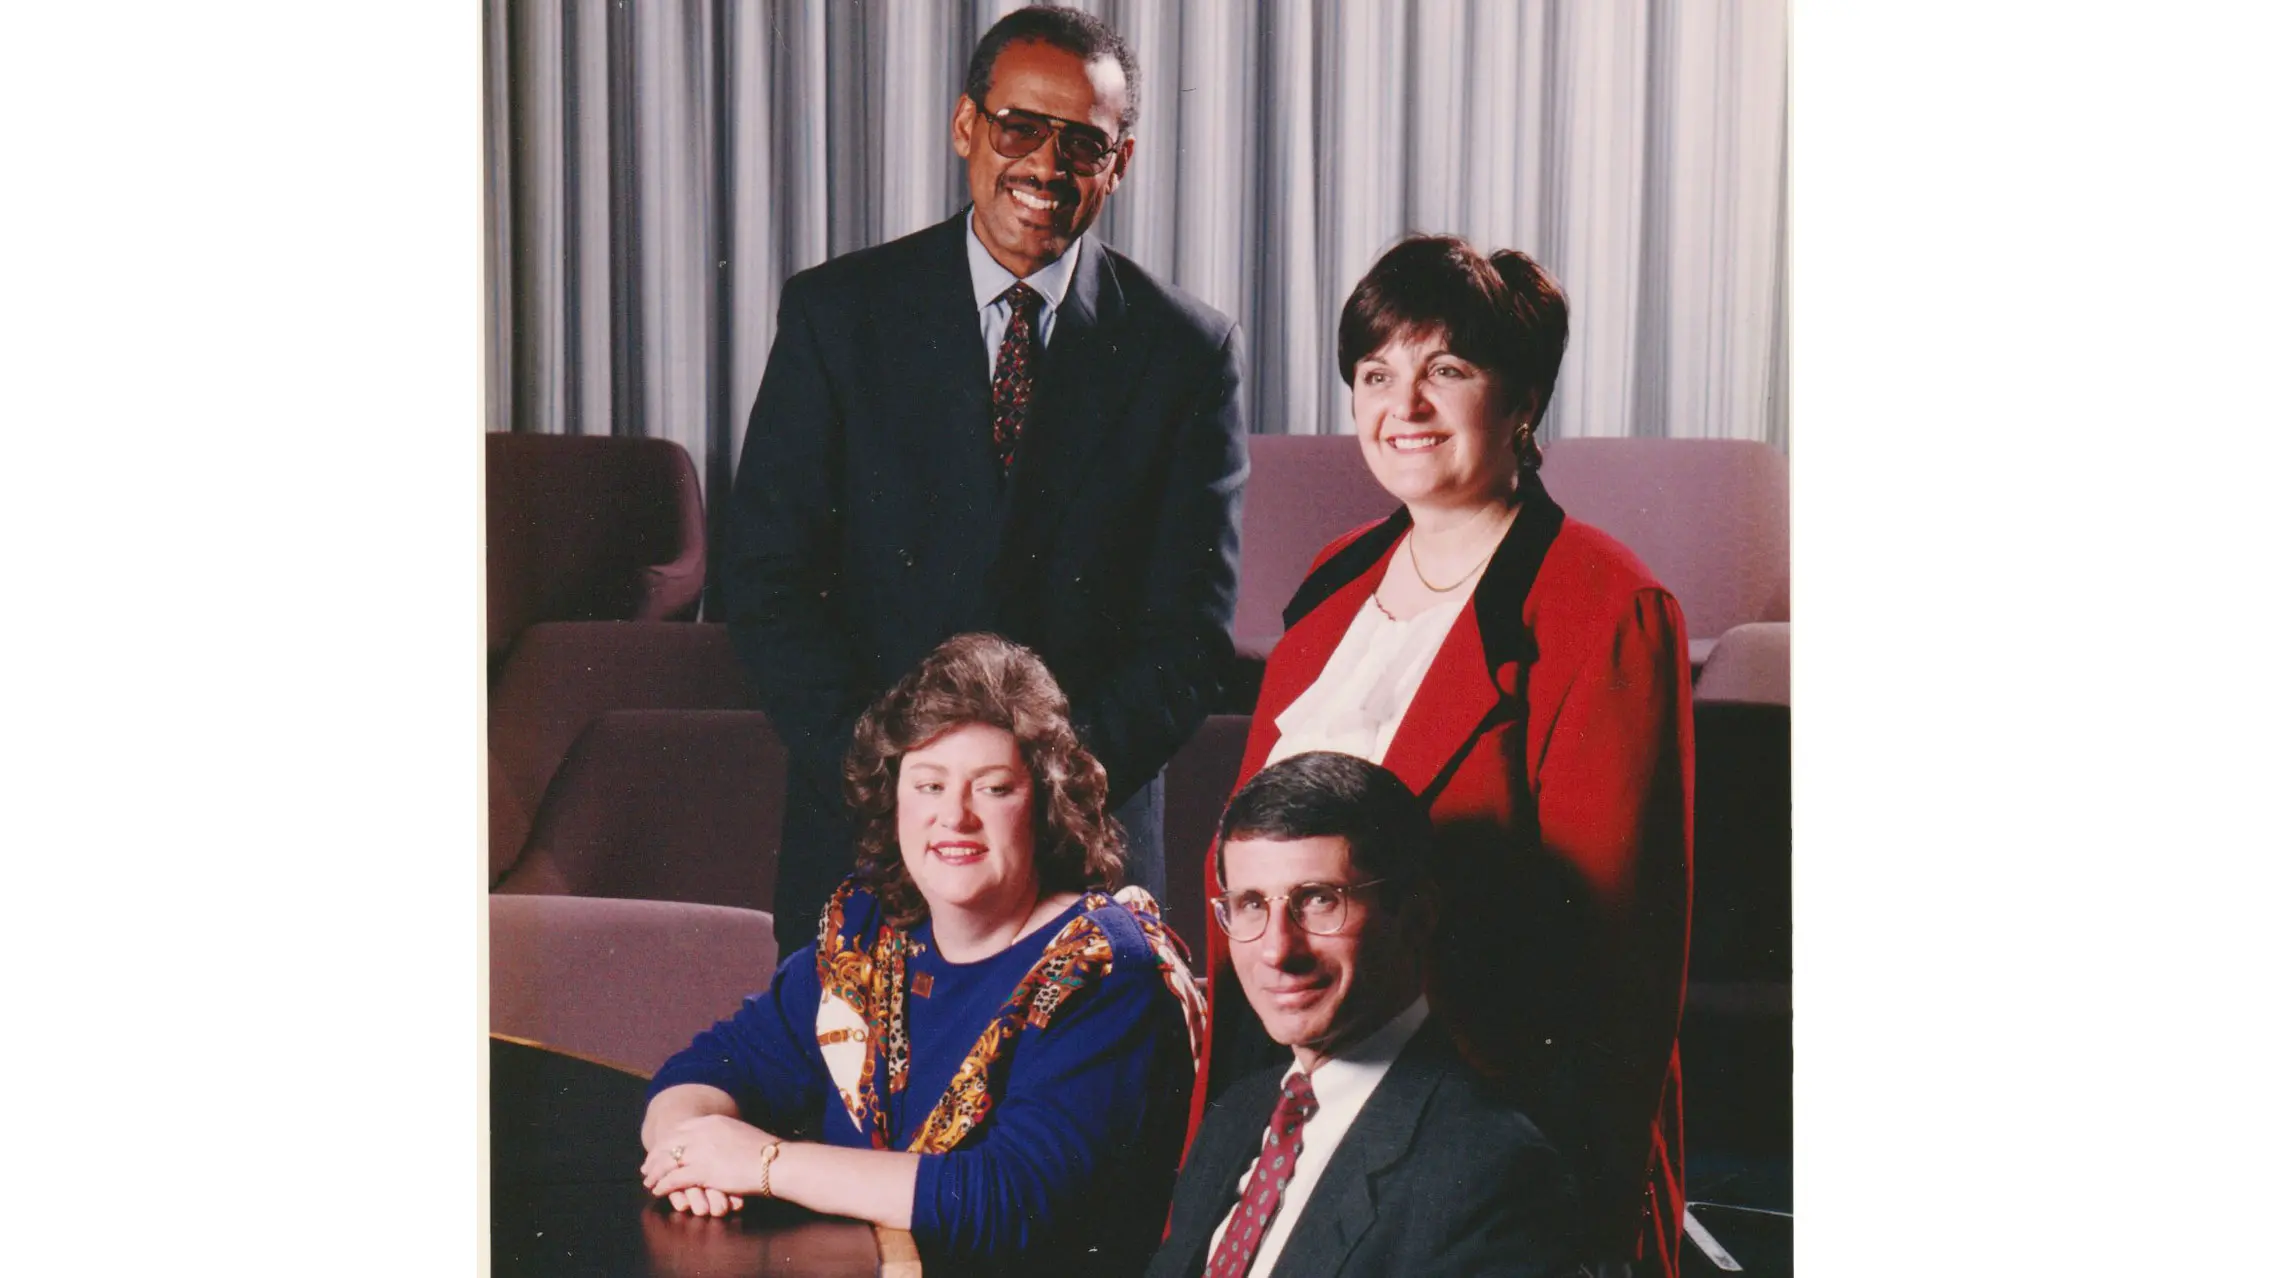 Dressed in a suit, Johnson poses for a photo with three other people, including a well-known face from these Covid-19 times, Dr. Anthony Fauci. All are smiling.